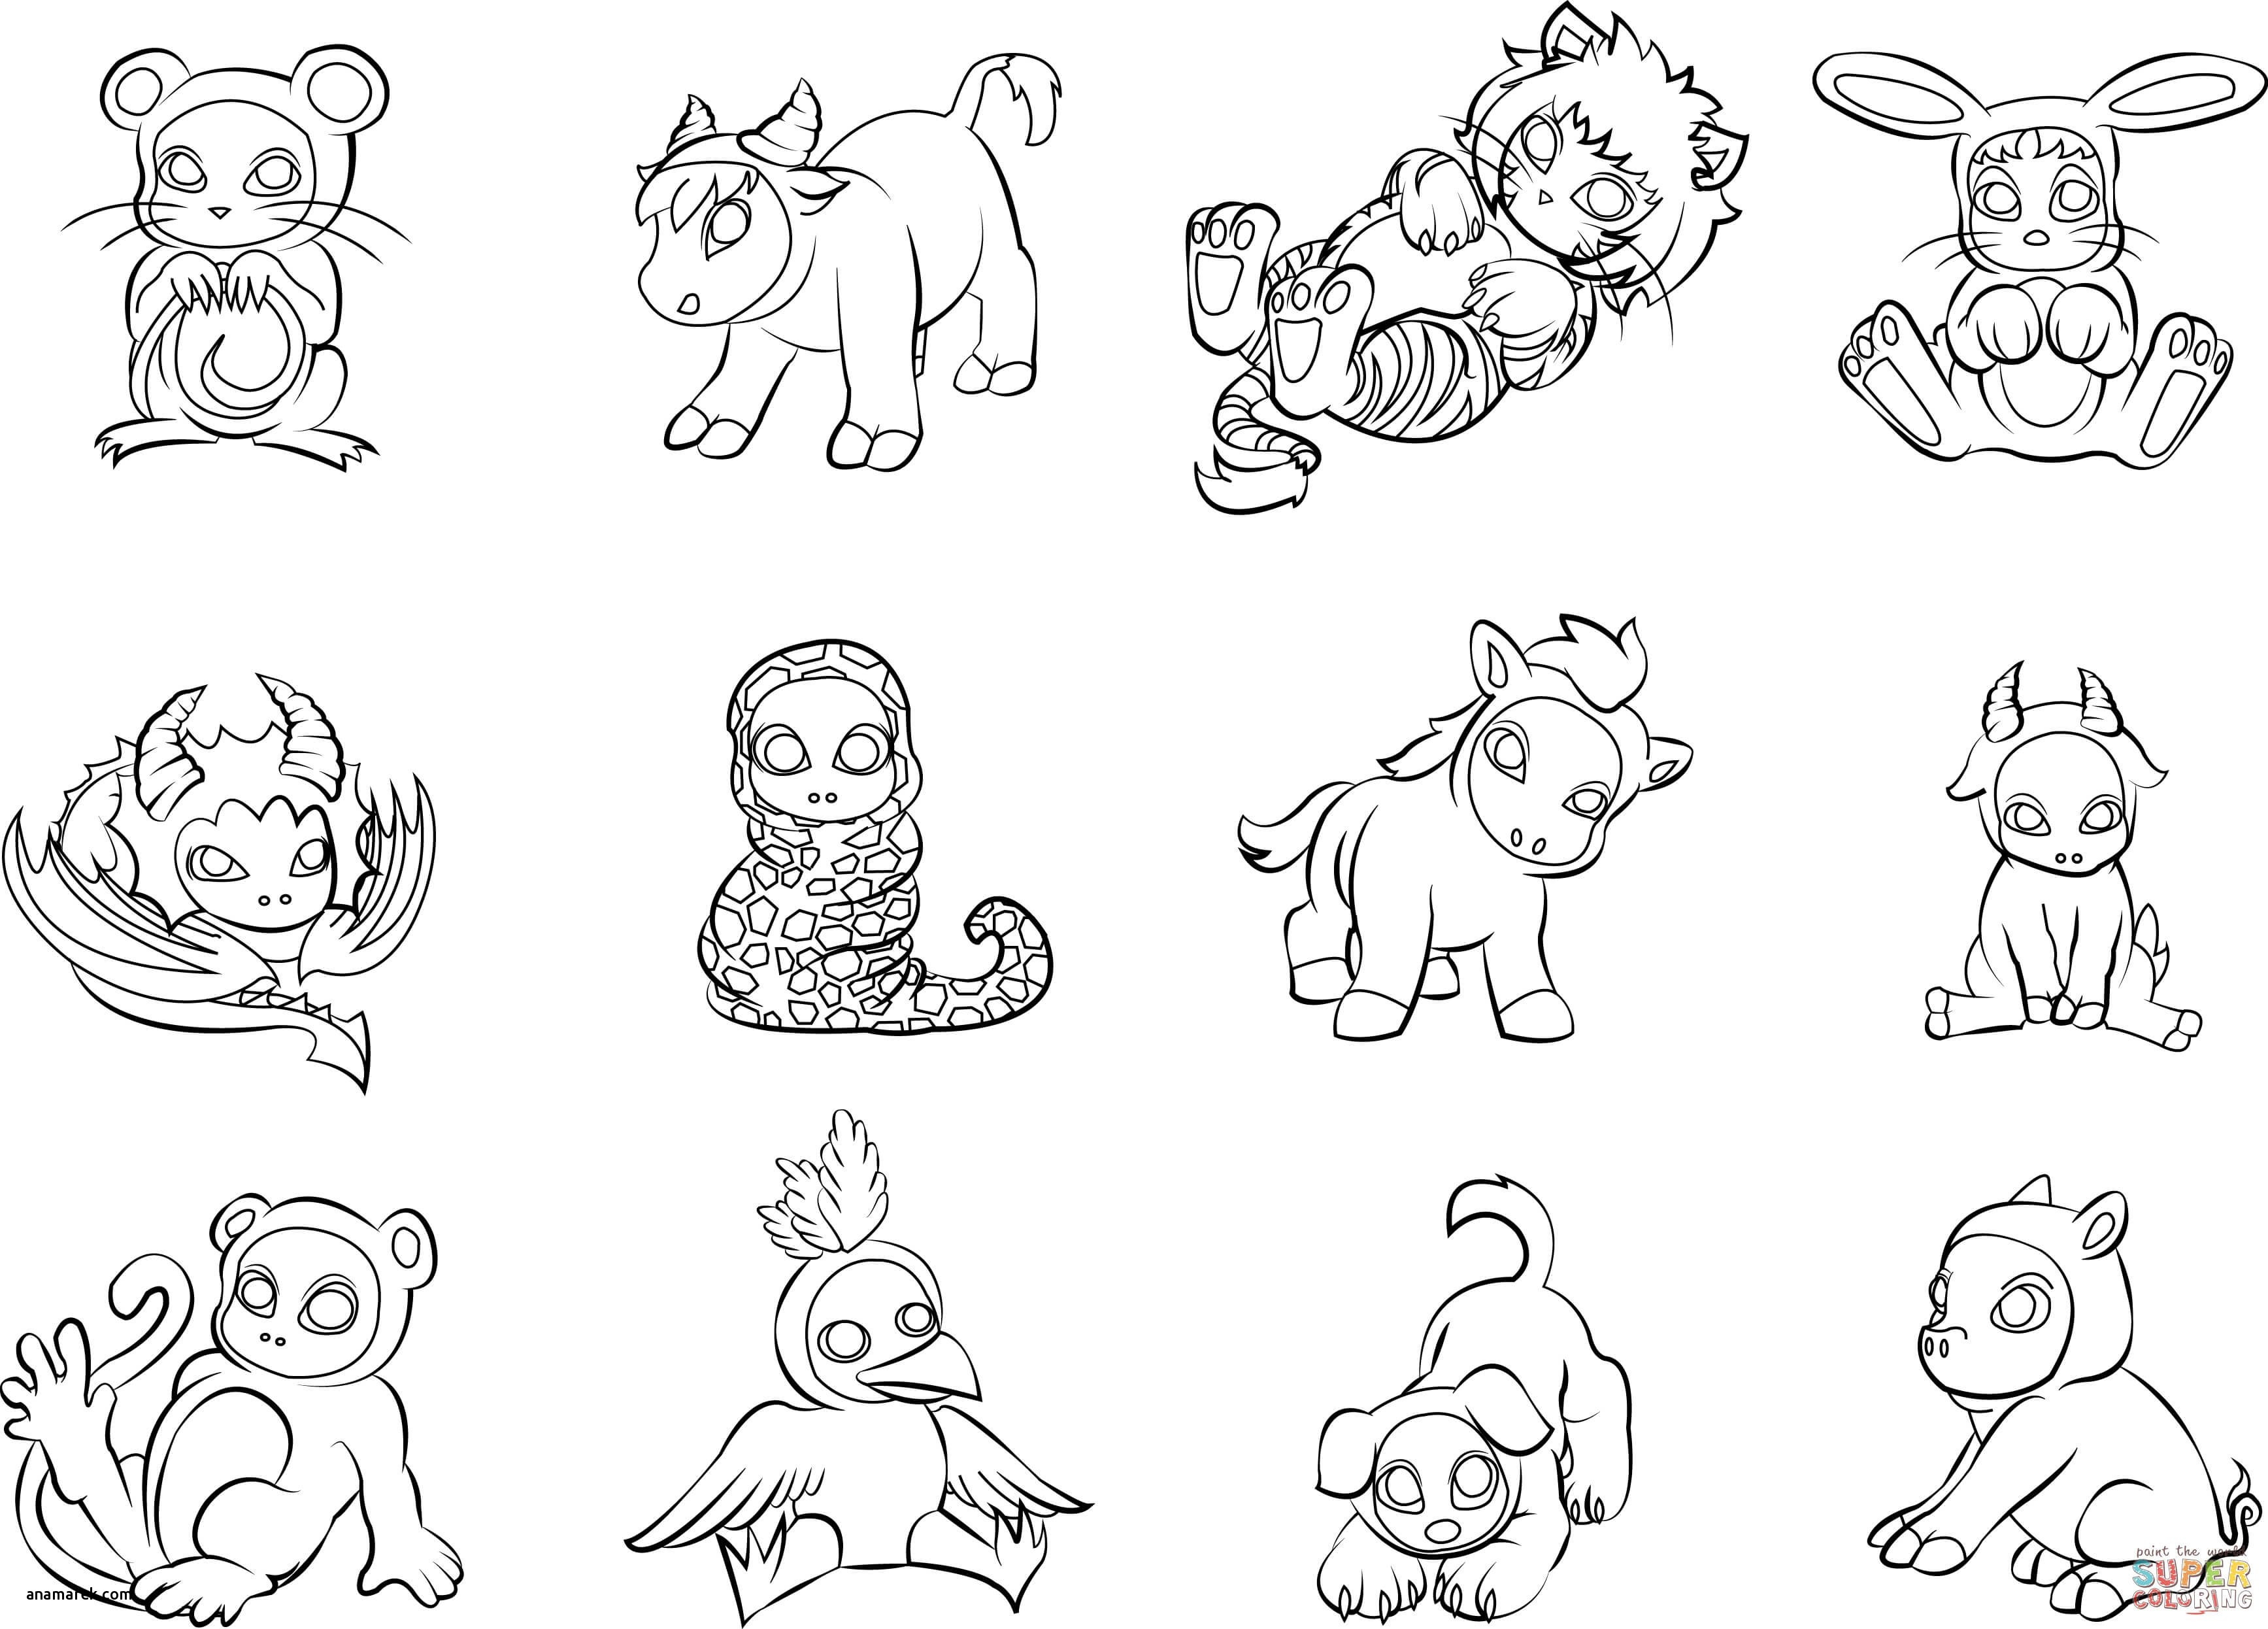 Coloring Pages Of Animals Hard Hard Coloring Pages For Kids Animals With Coloring Pages Animals